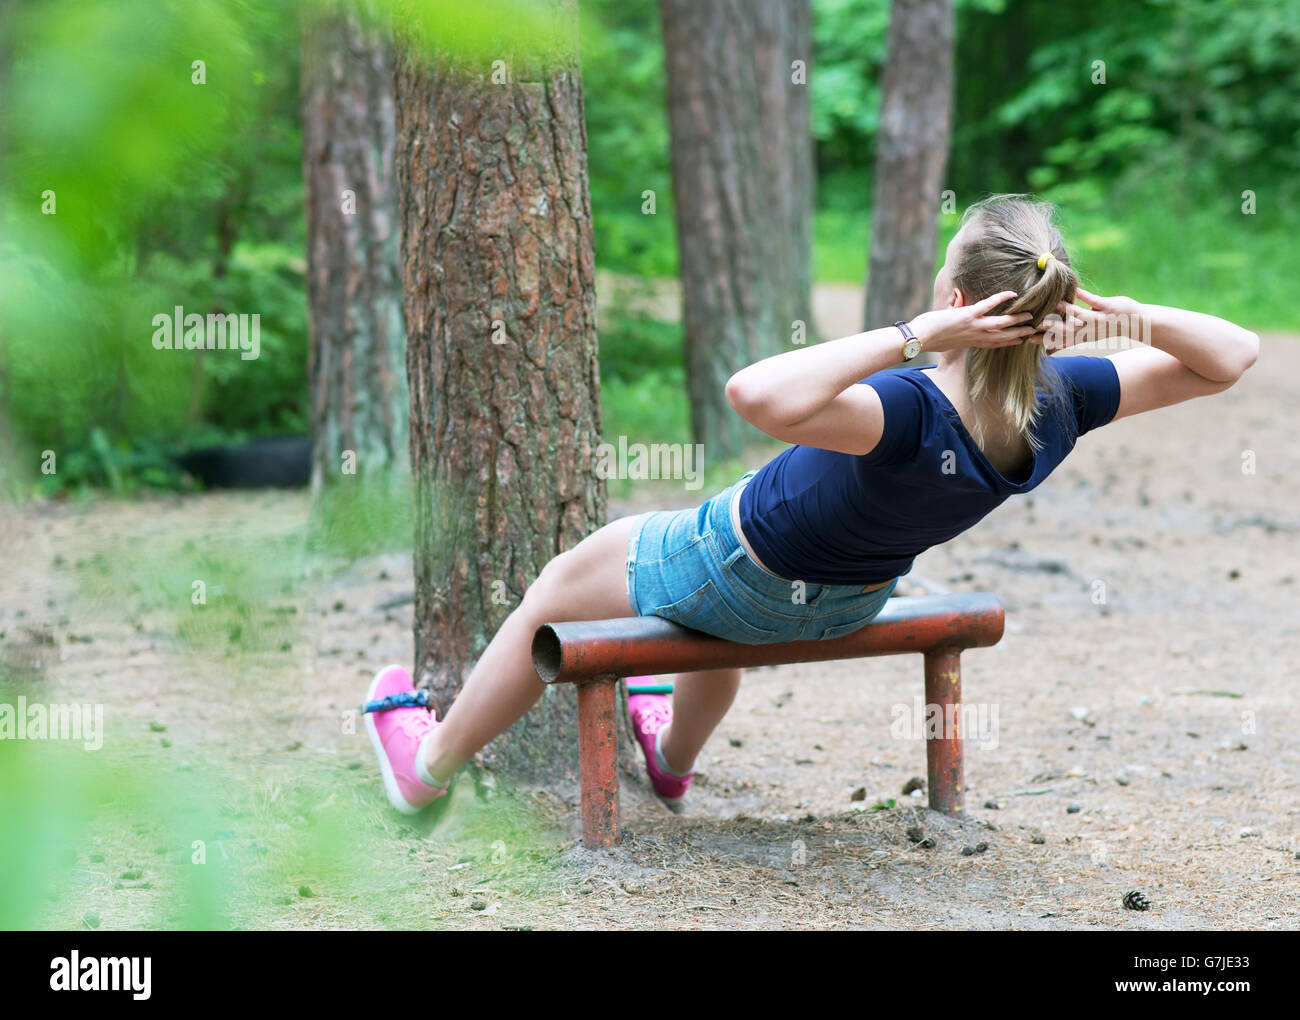 Woman doing abs workout in the forest. Stock Photo